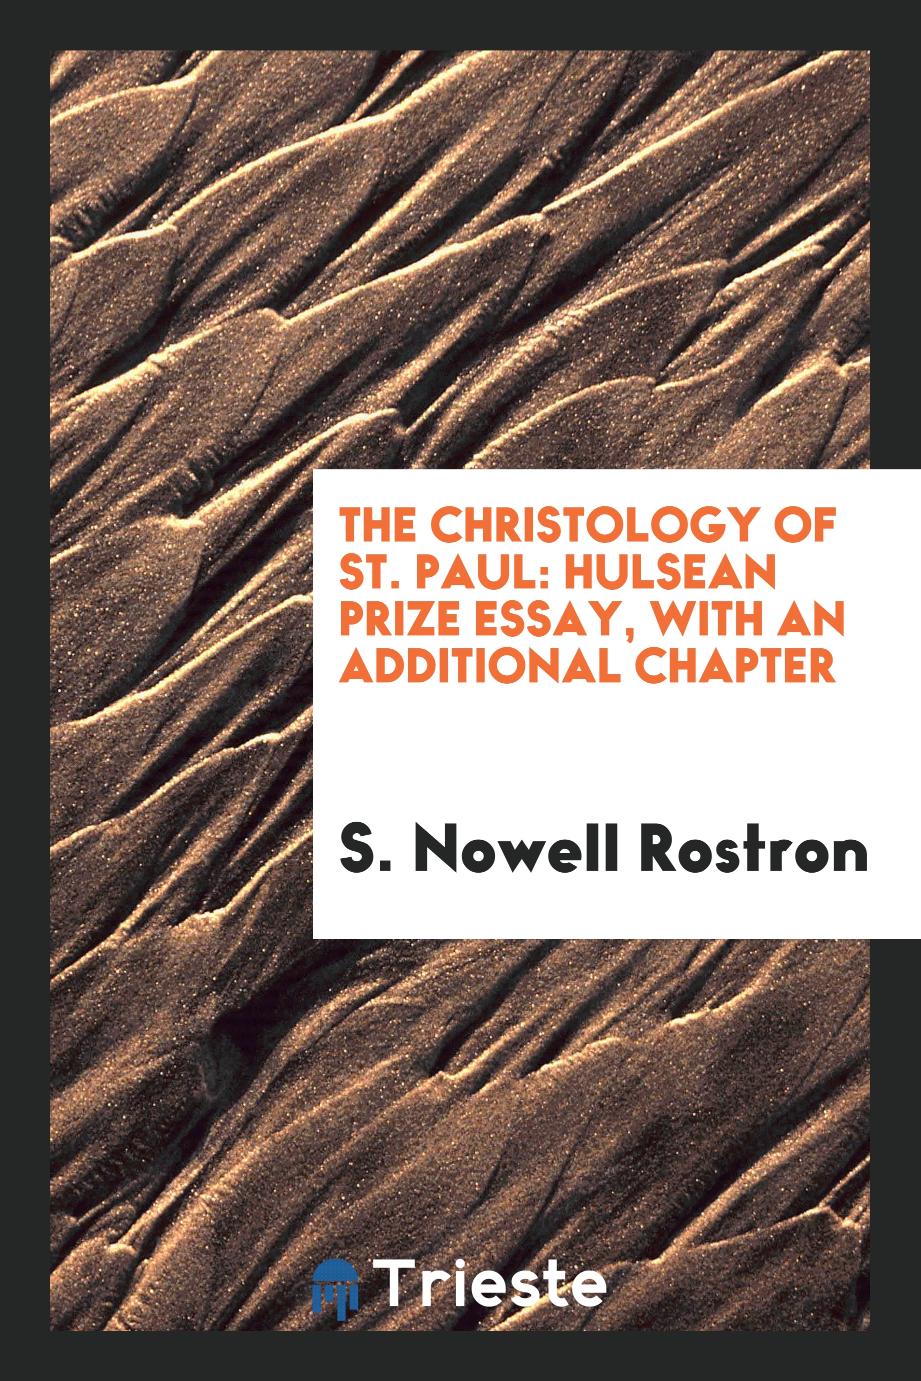 The Christology of St. Paul: Hulsean prize essay, with an additional chapter